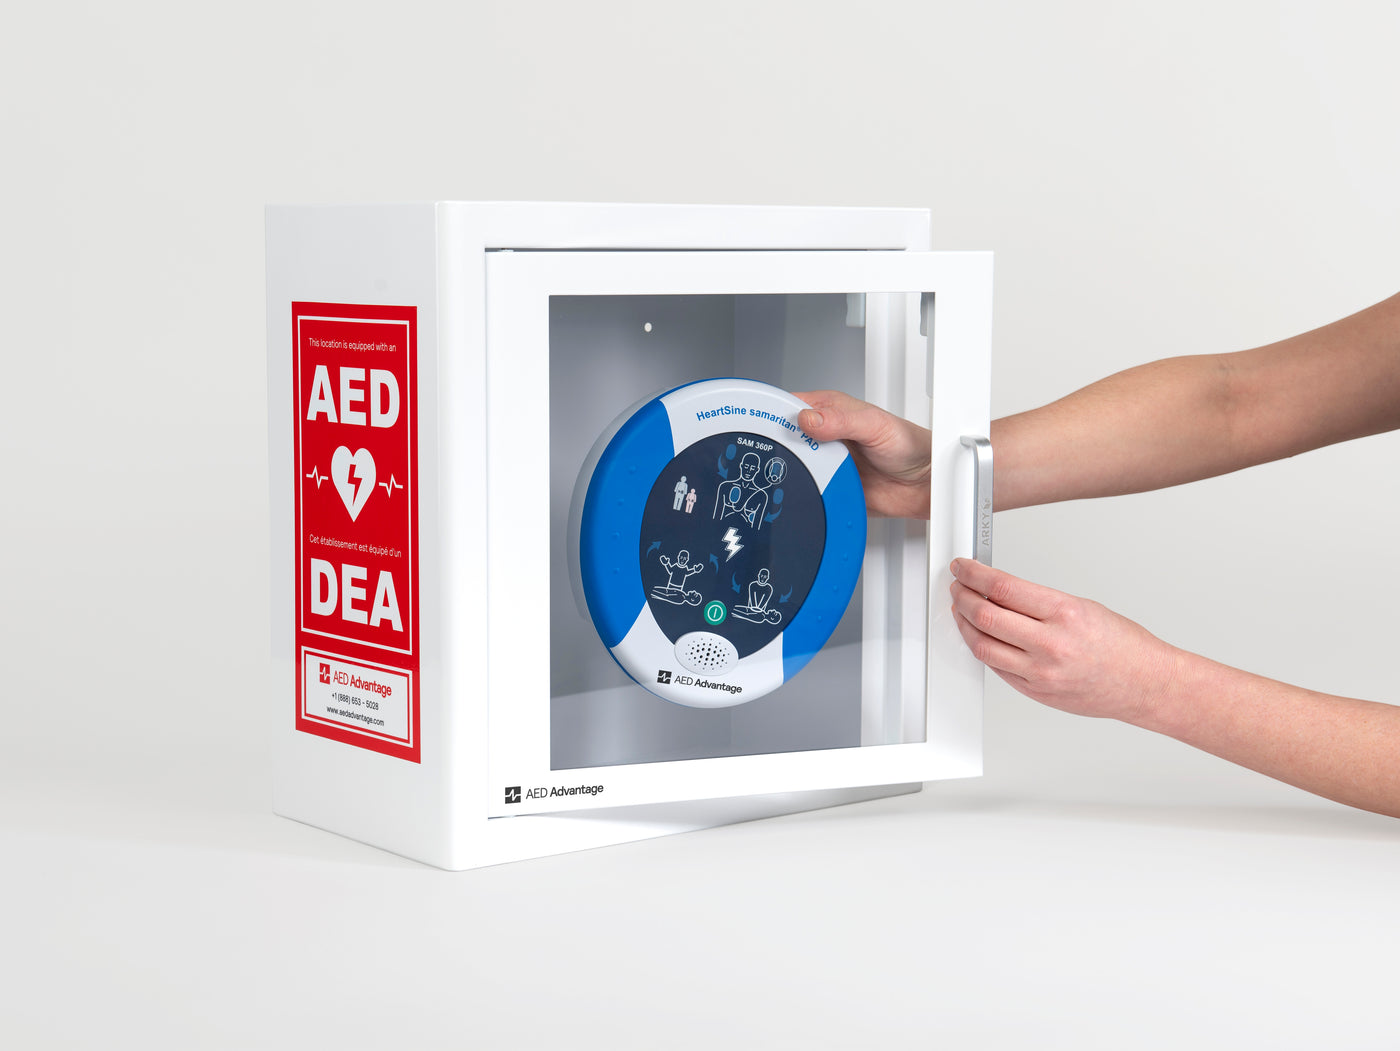 A blue and white HeartSine 360P AED being retrieved by hand from a white metal cabinet with red decals